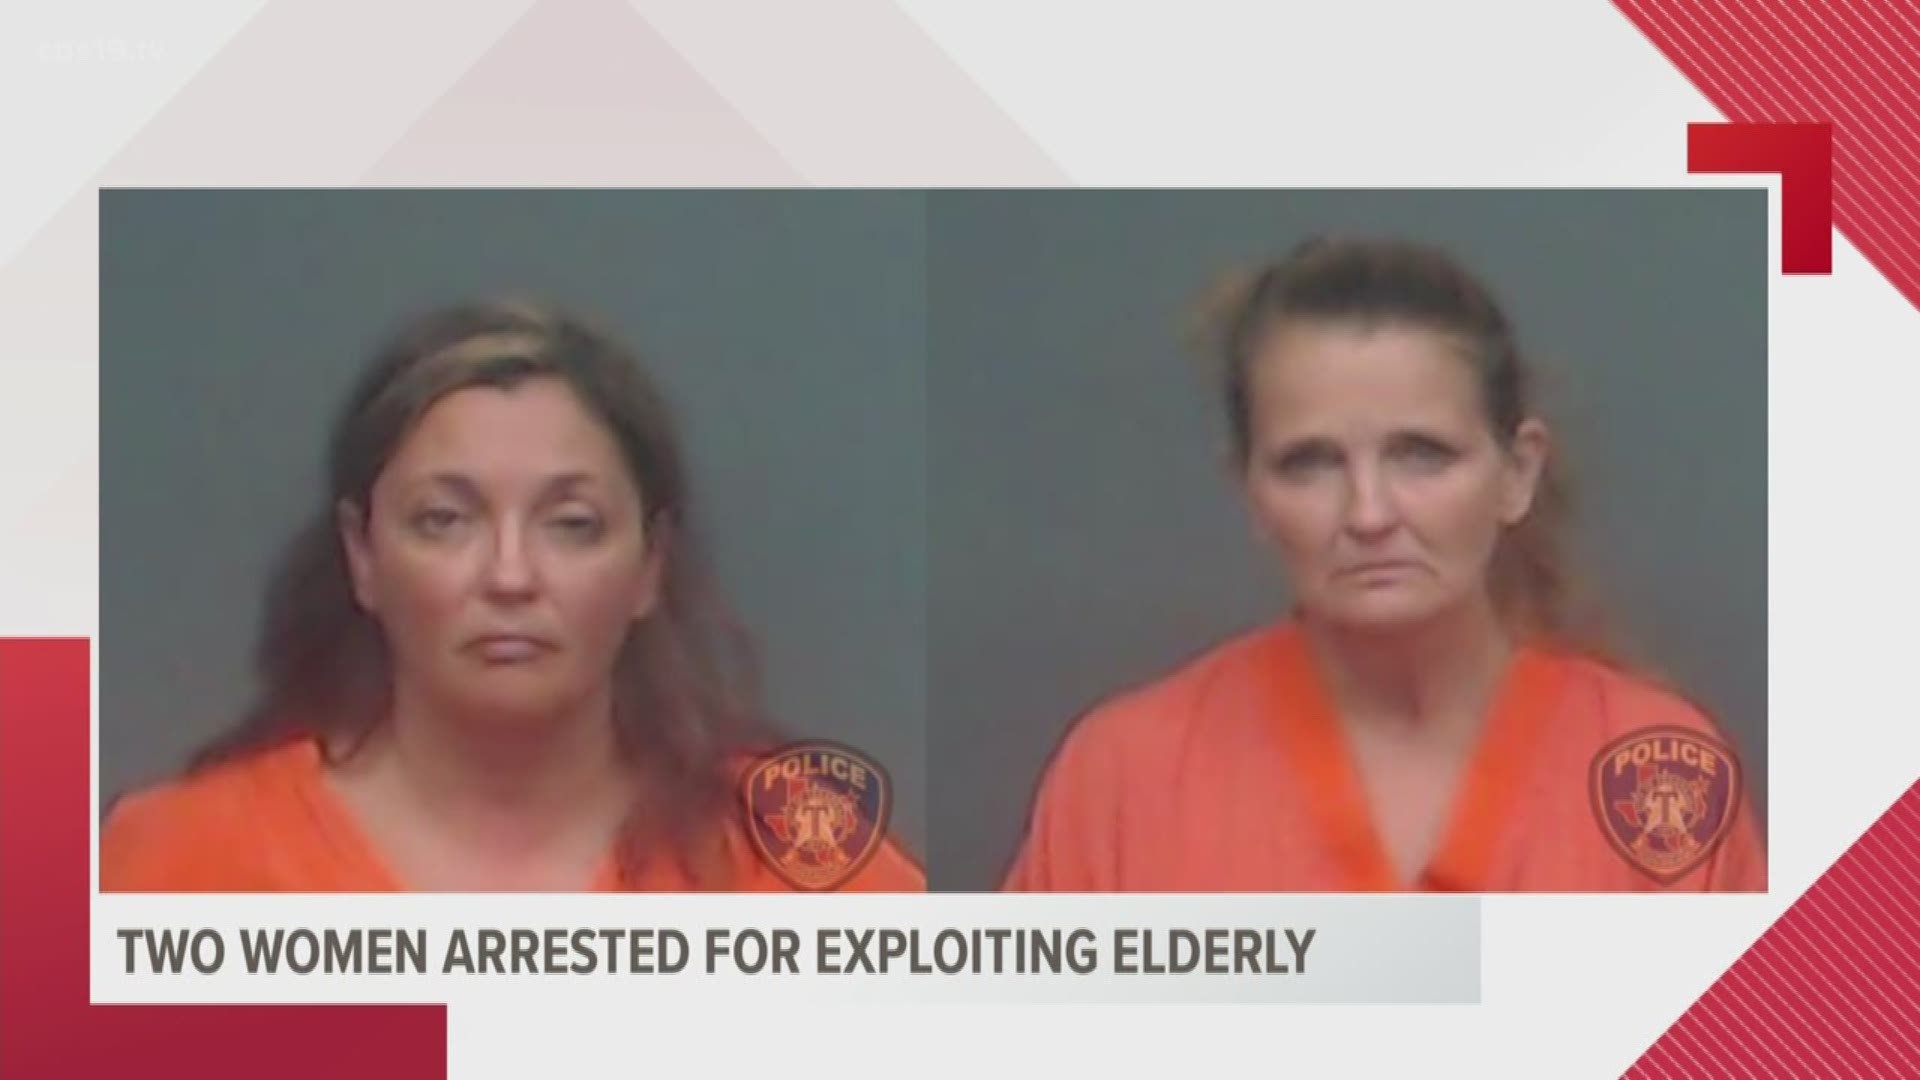 Officials say the actions of Patricia Richardson and Rhonda Latham left the women broke and living month-to-month.